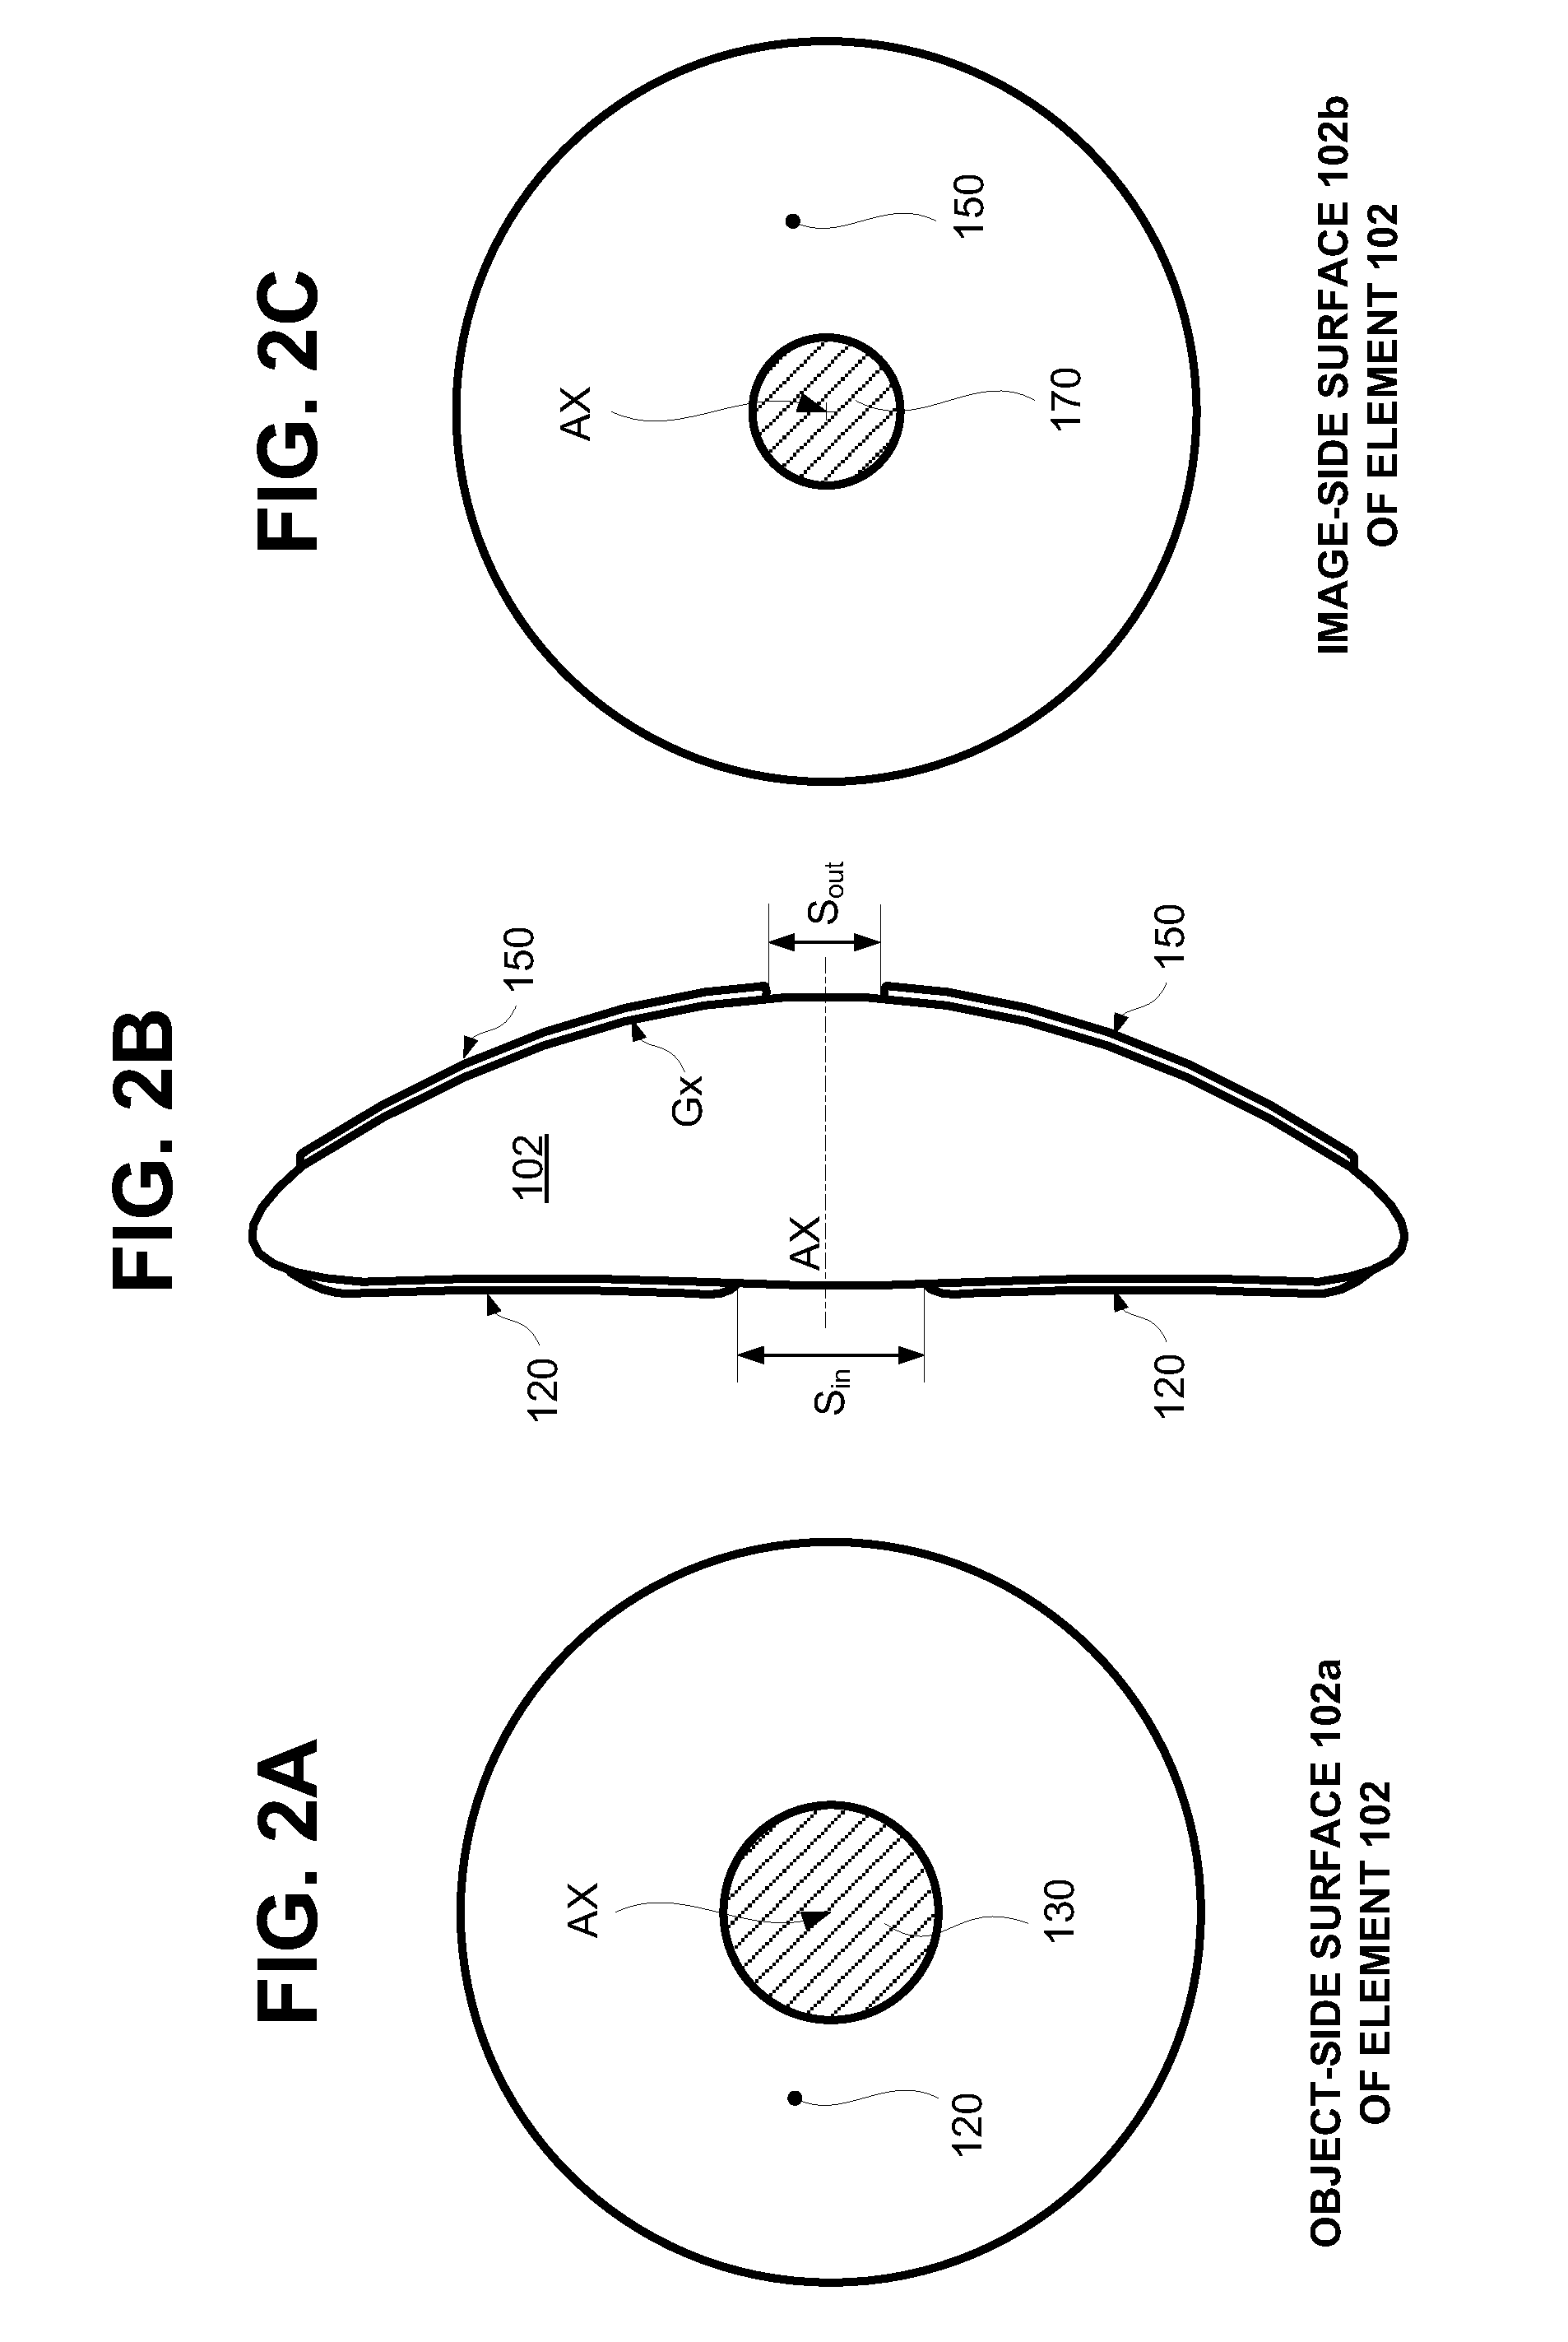 Catadioptric optical system with multi-reflection element for high numerical aperture imaging